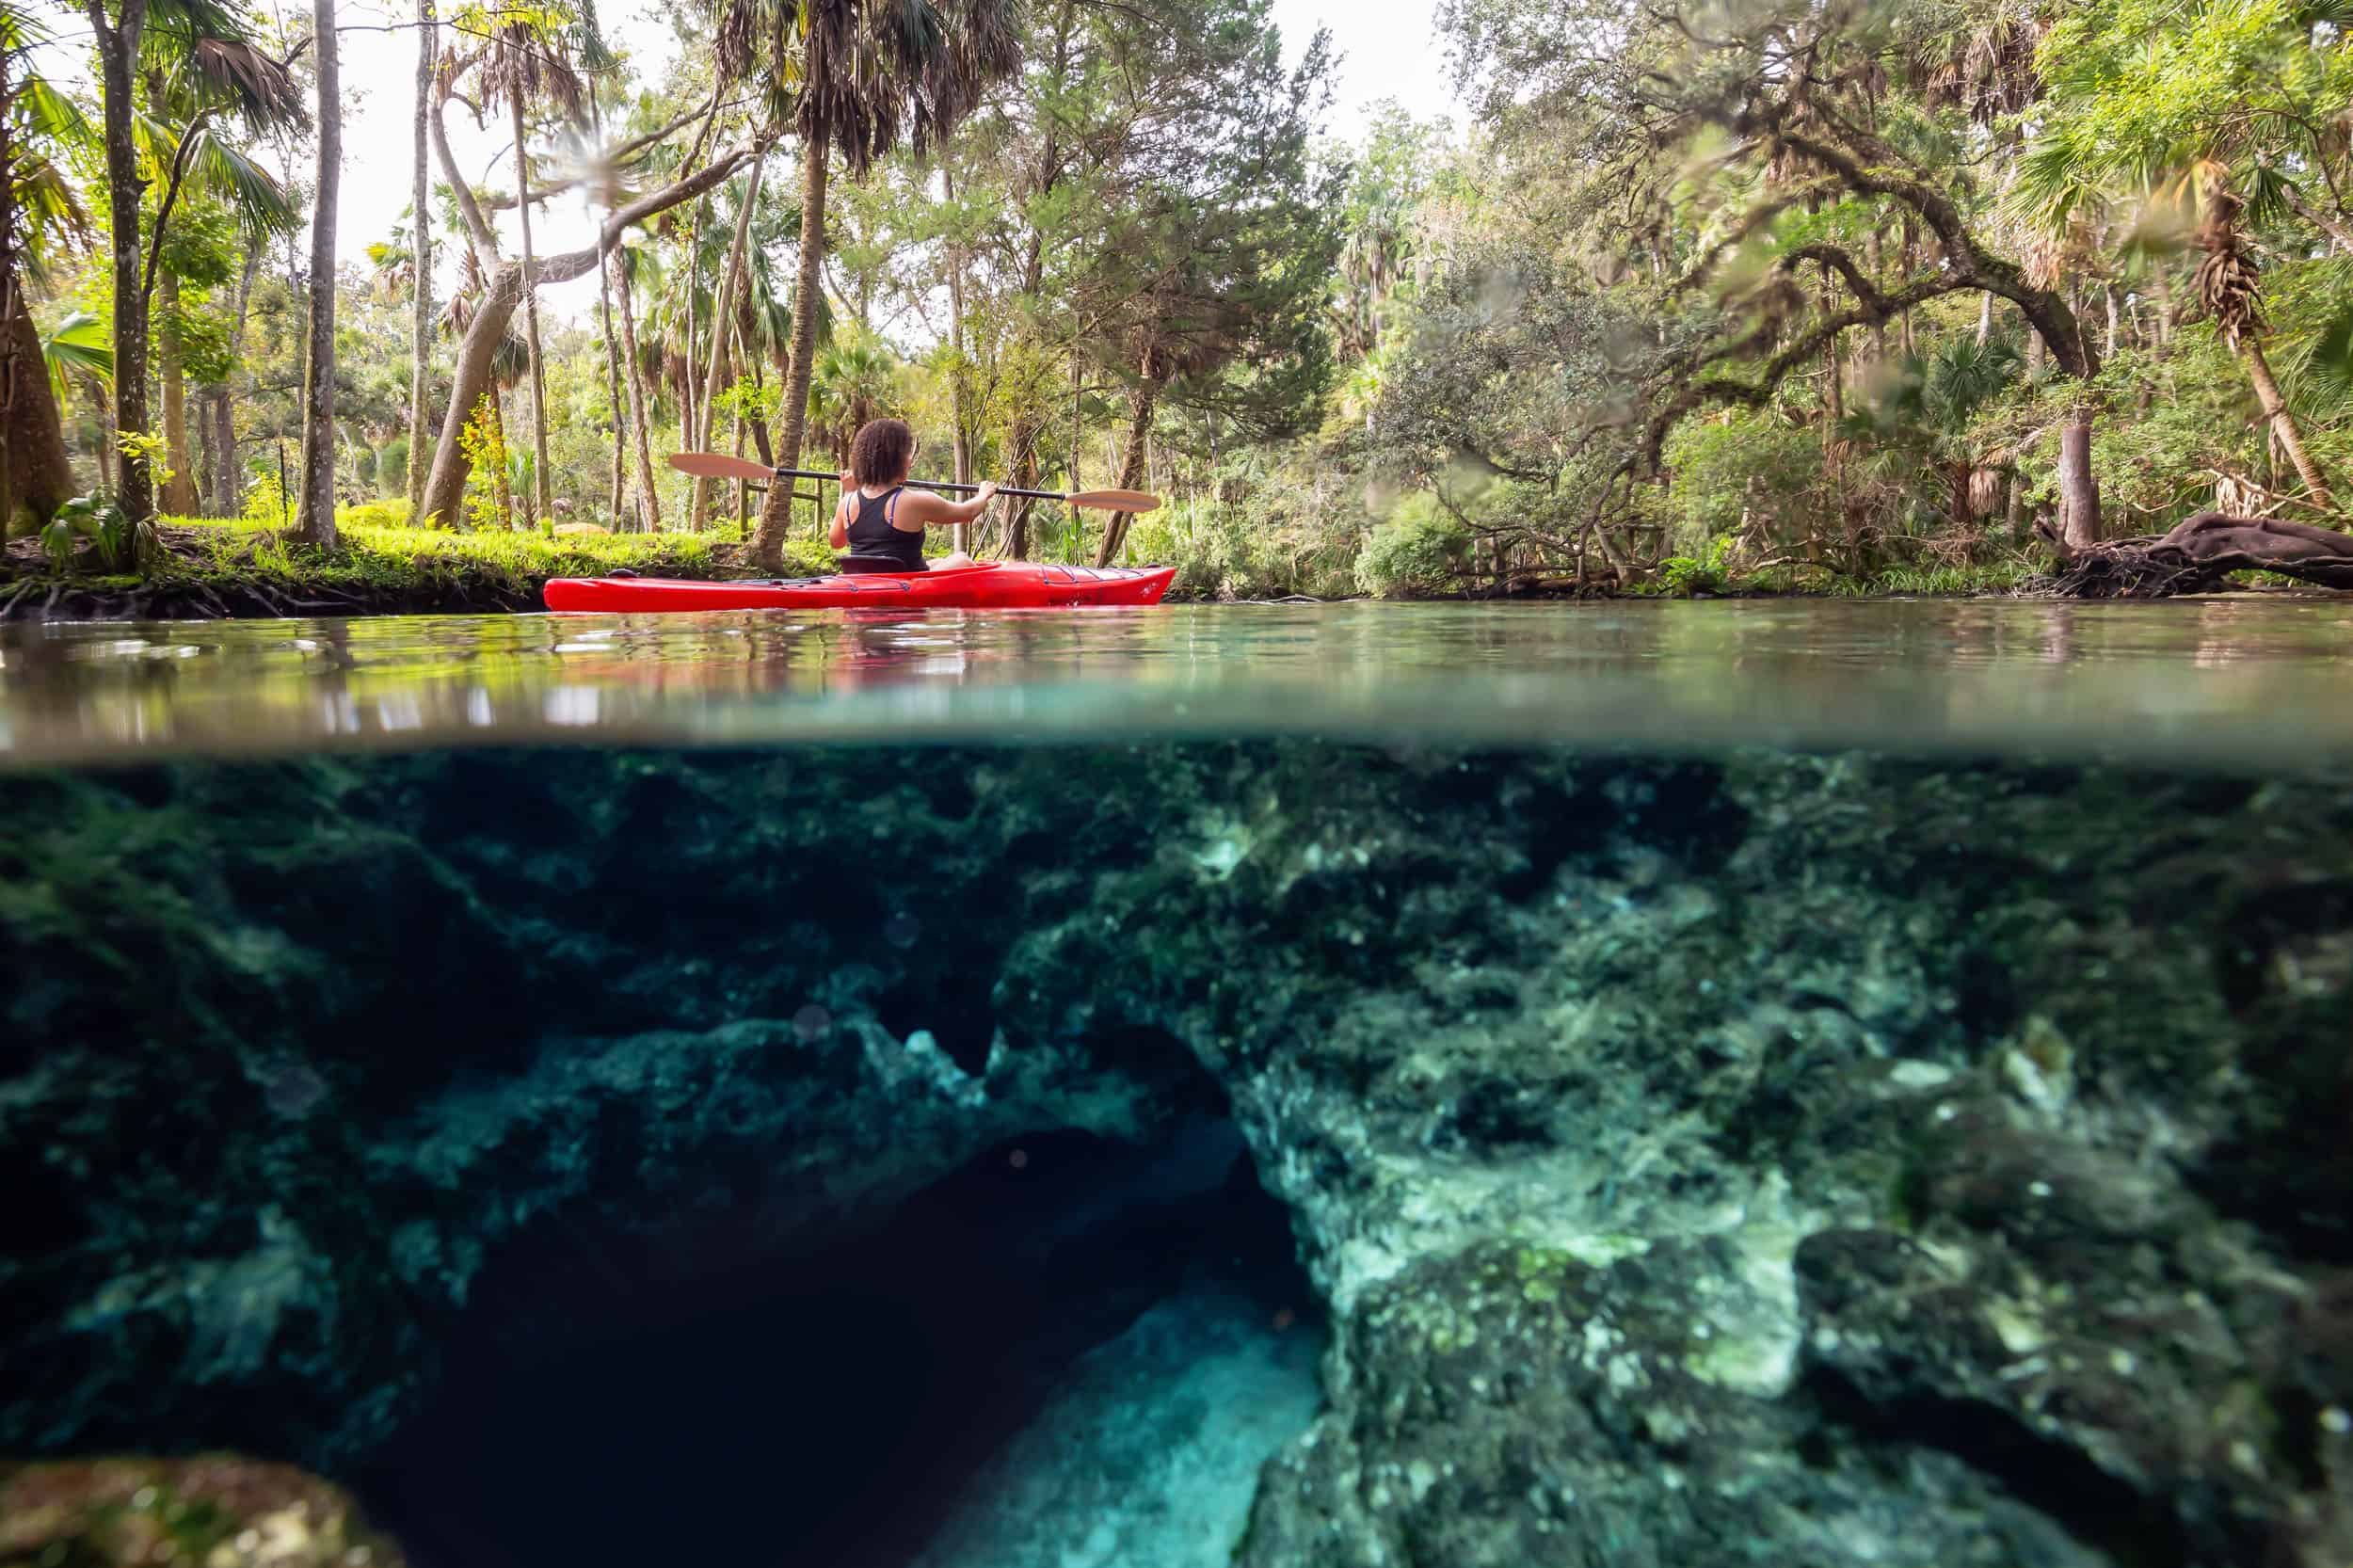 It's Never Not a Good Time to Visit Florida's Incredible Natural Springs